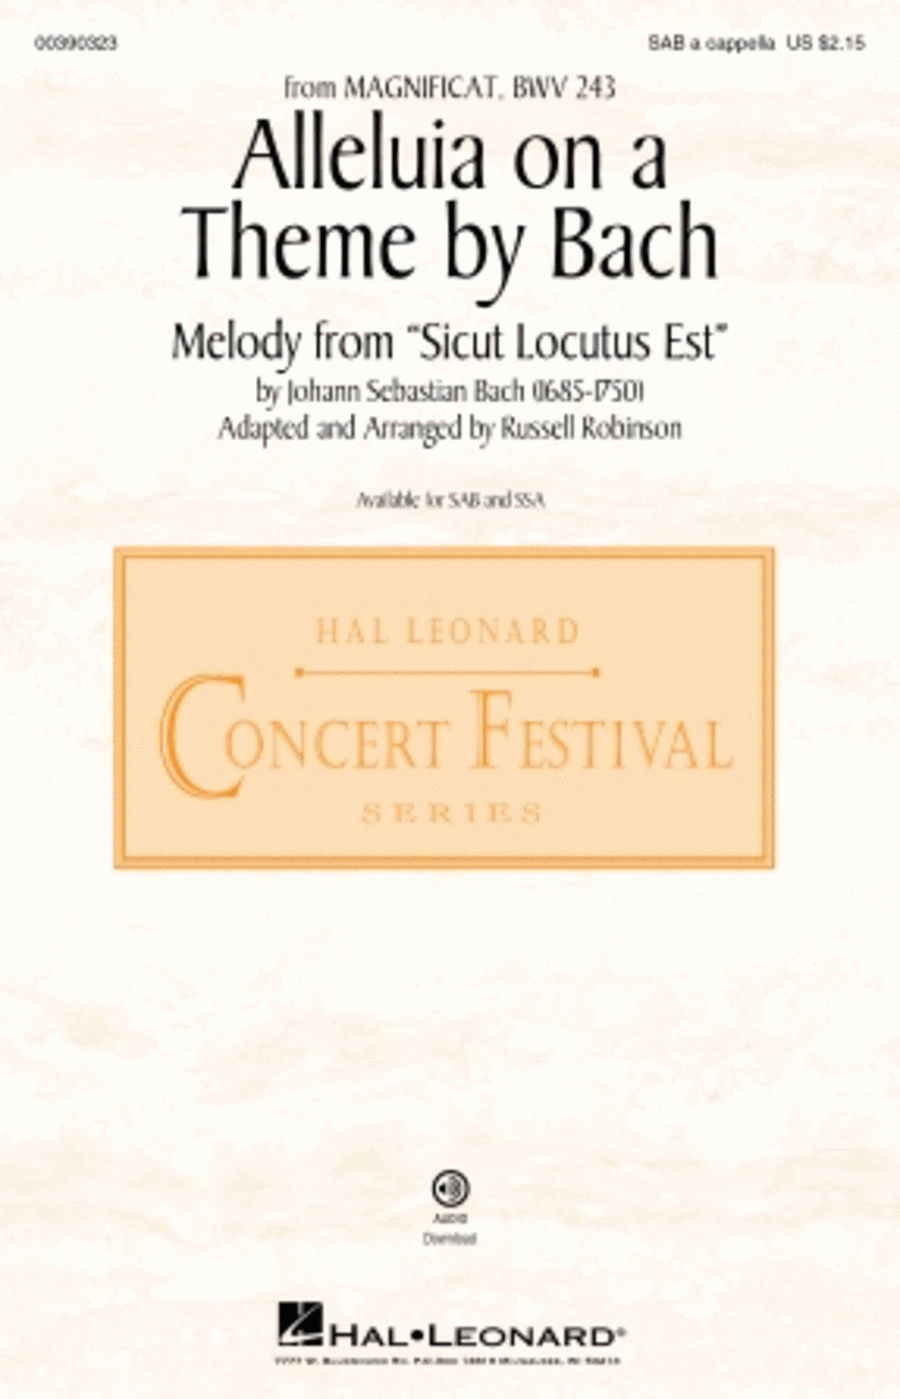 Alleluia on a Theme by Bach (BWV 243)